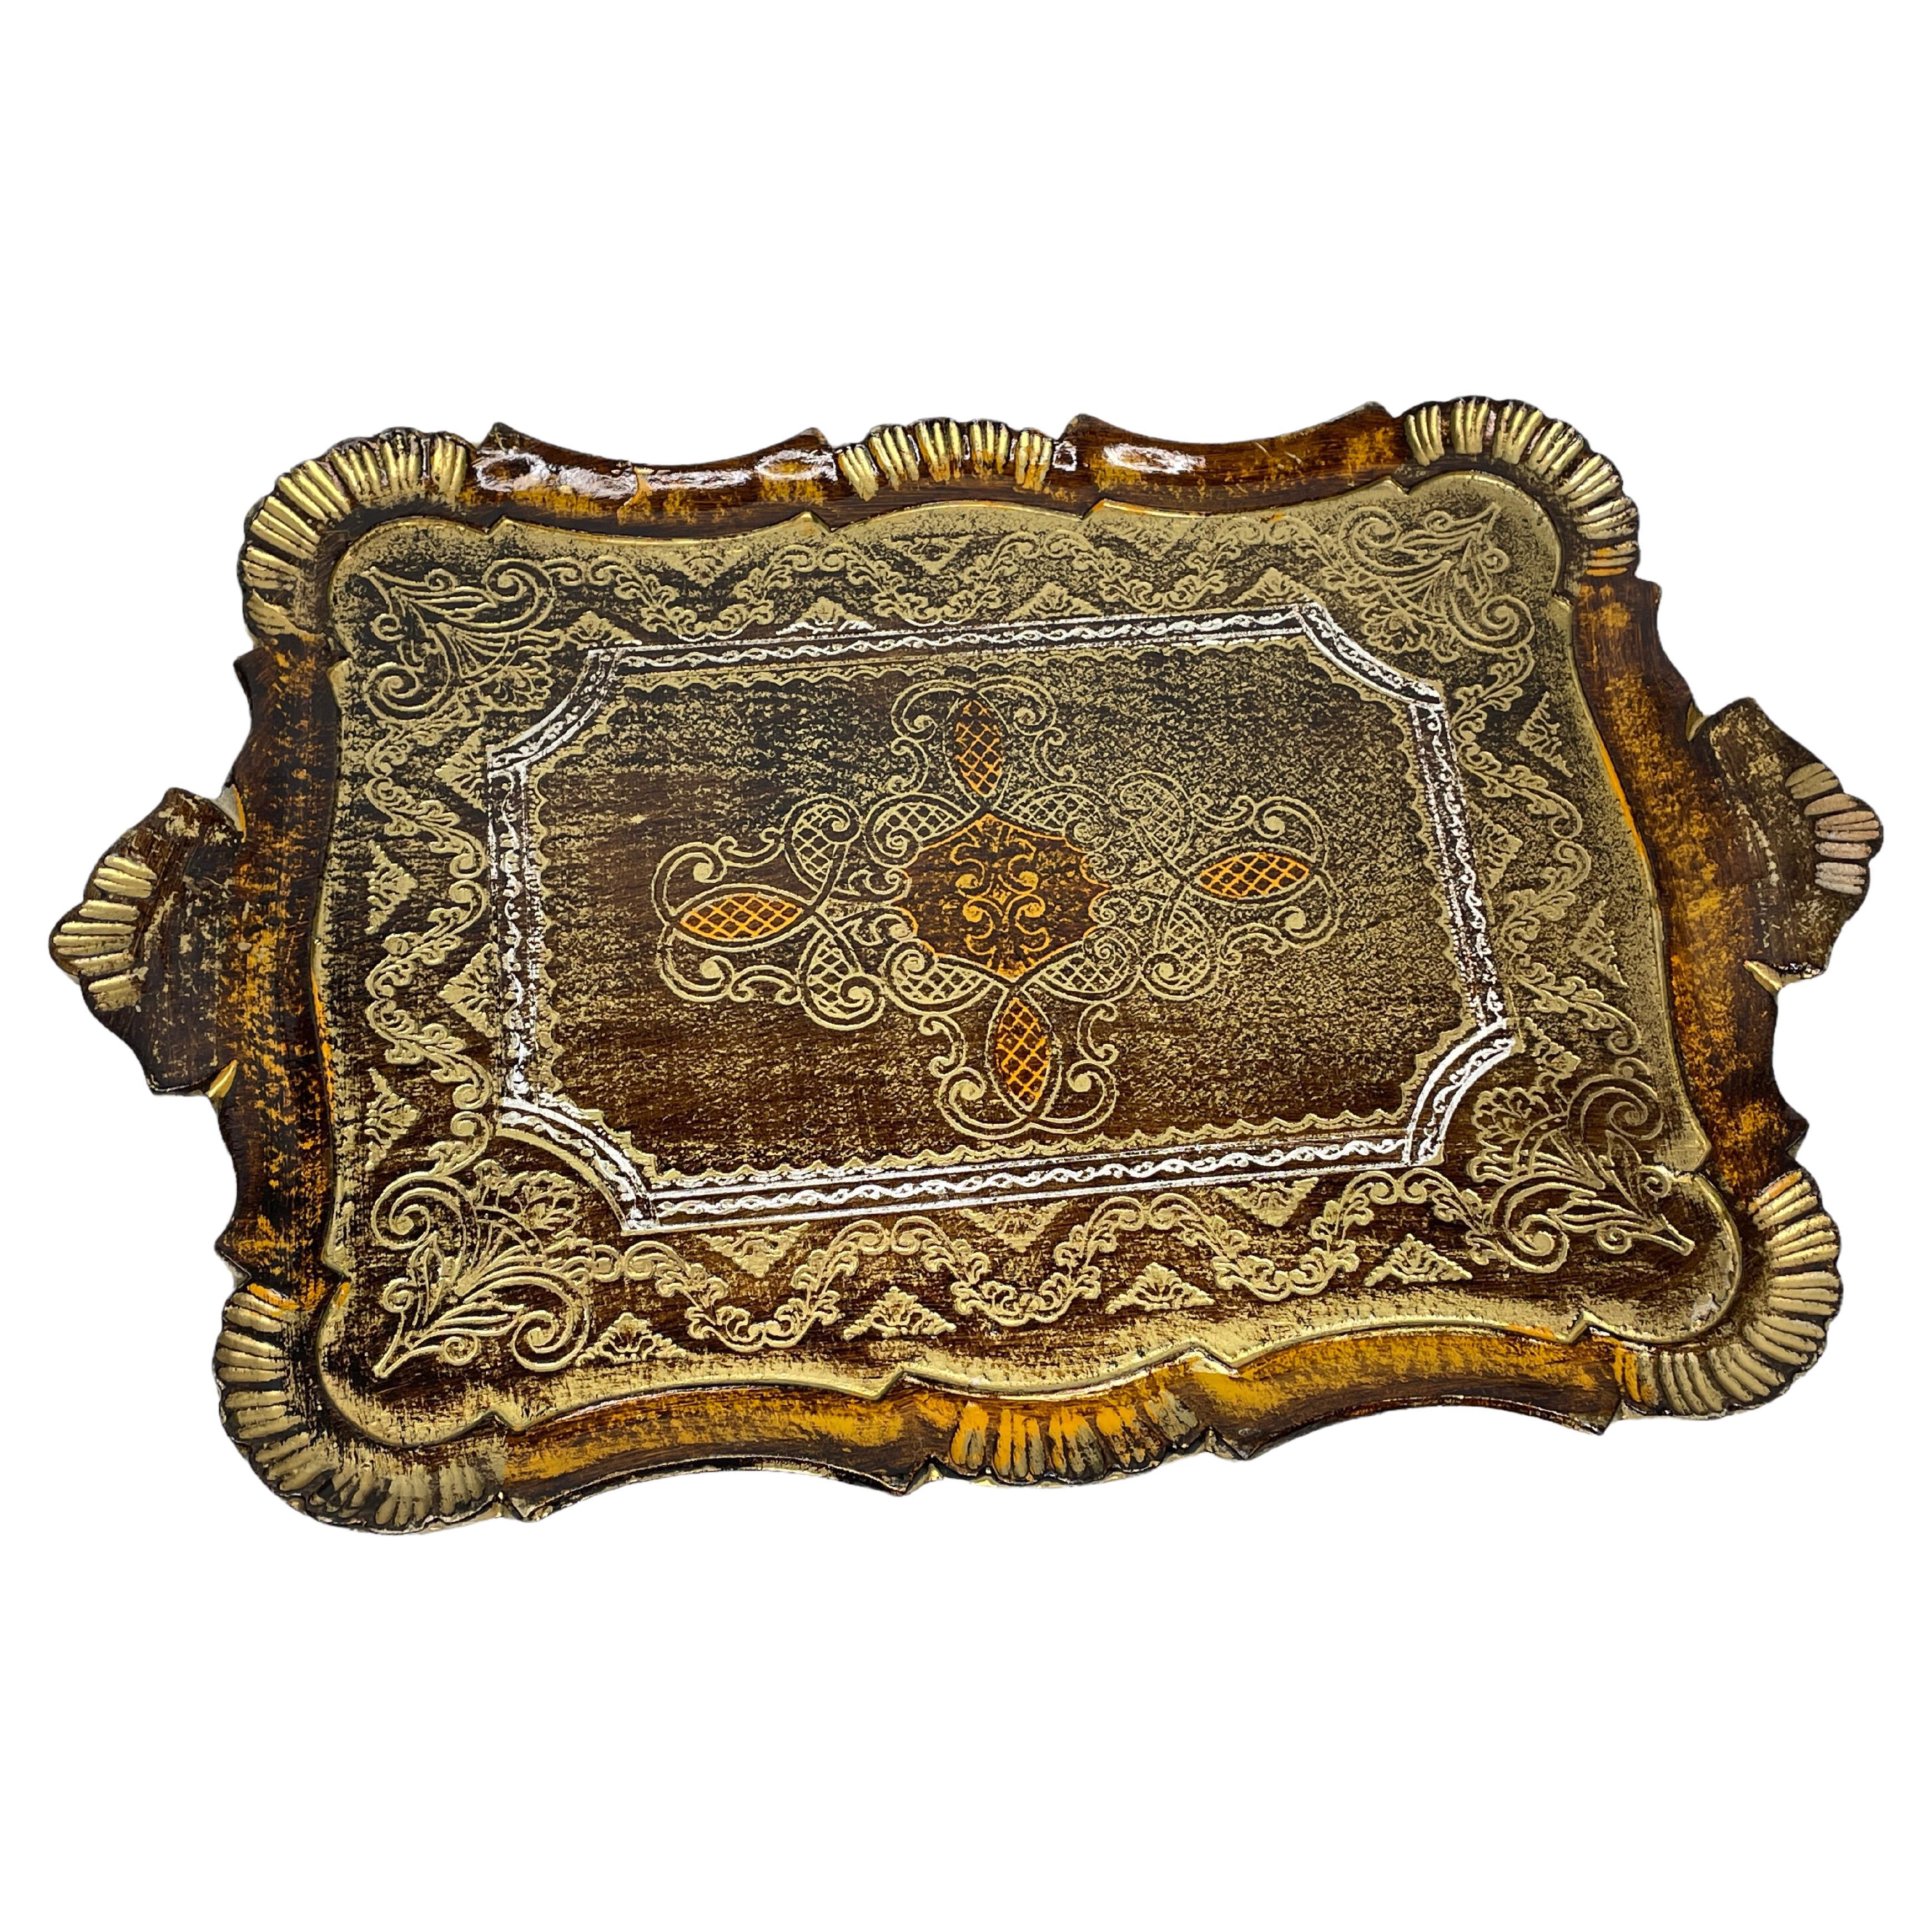 Stunning Italian Florentine Gilded Gilt Wood Serving Tray Toleware Tole, 1960s